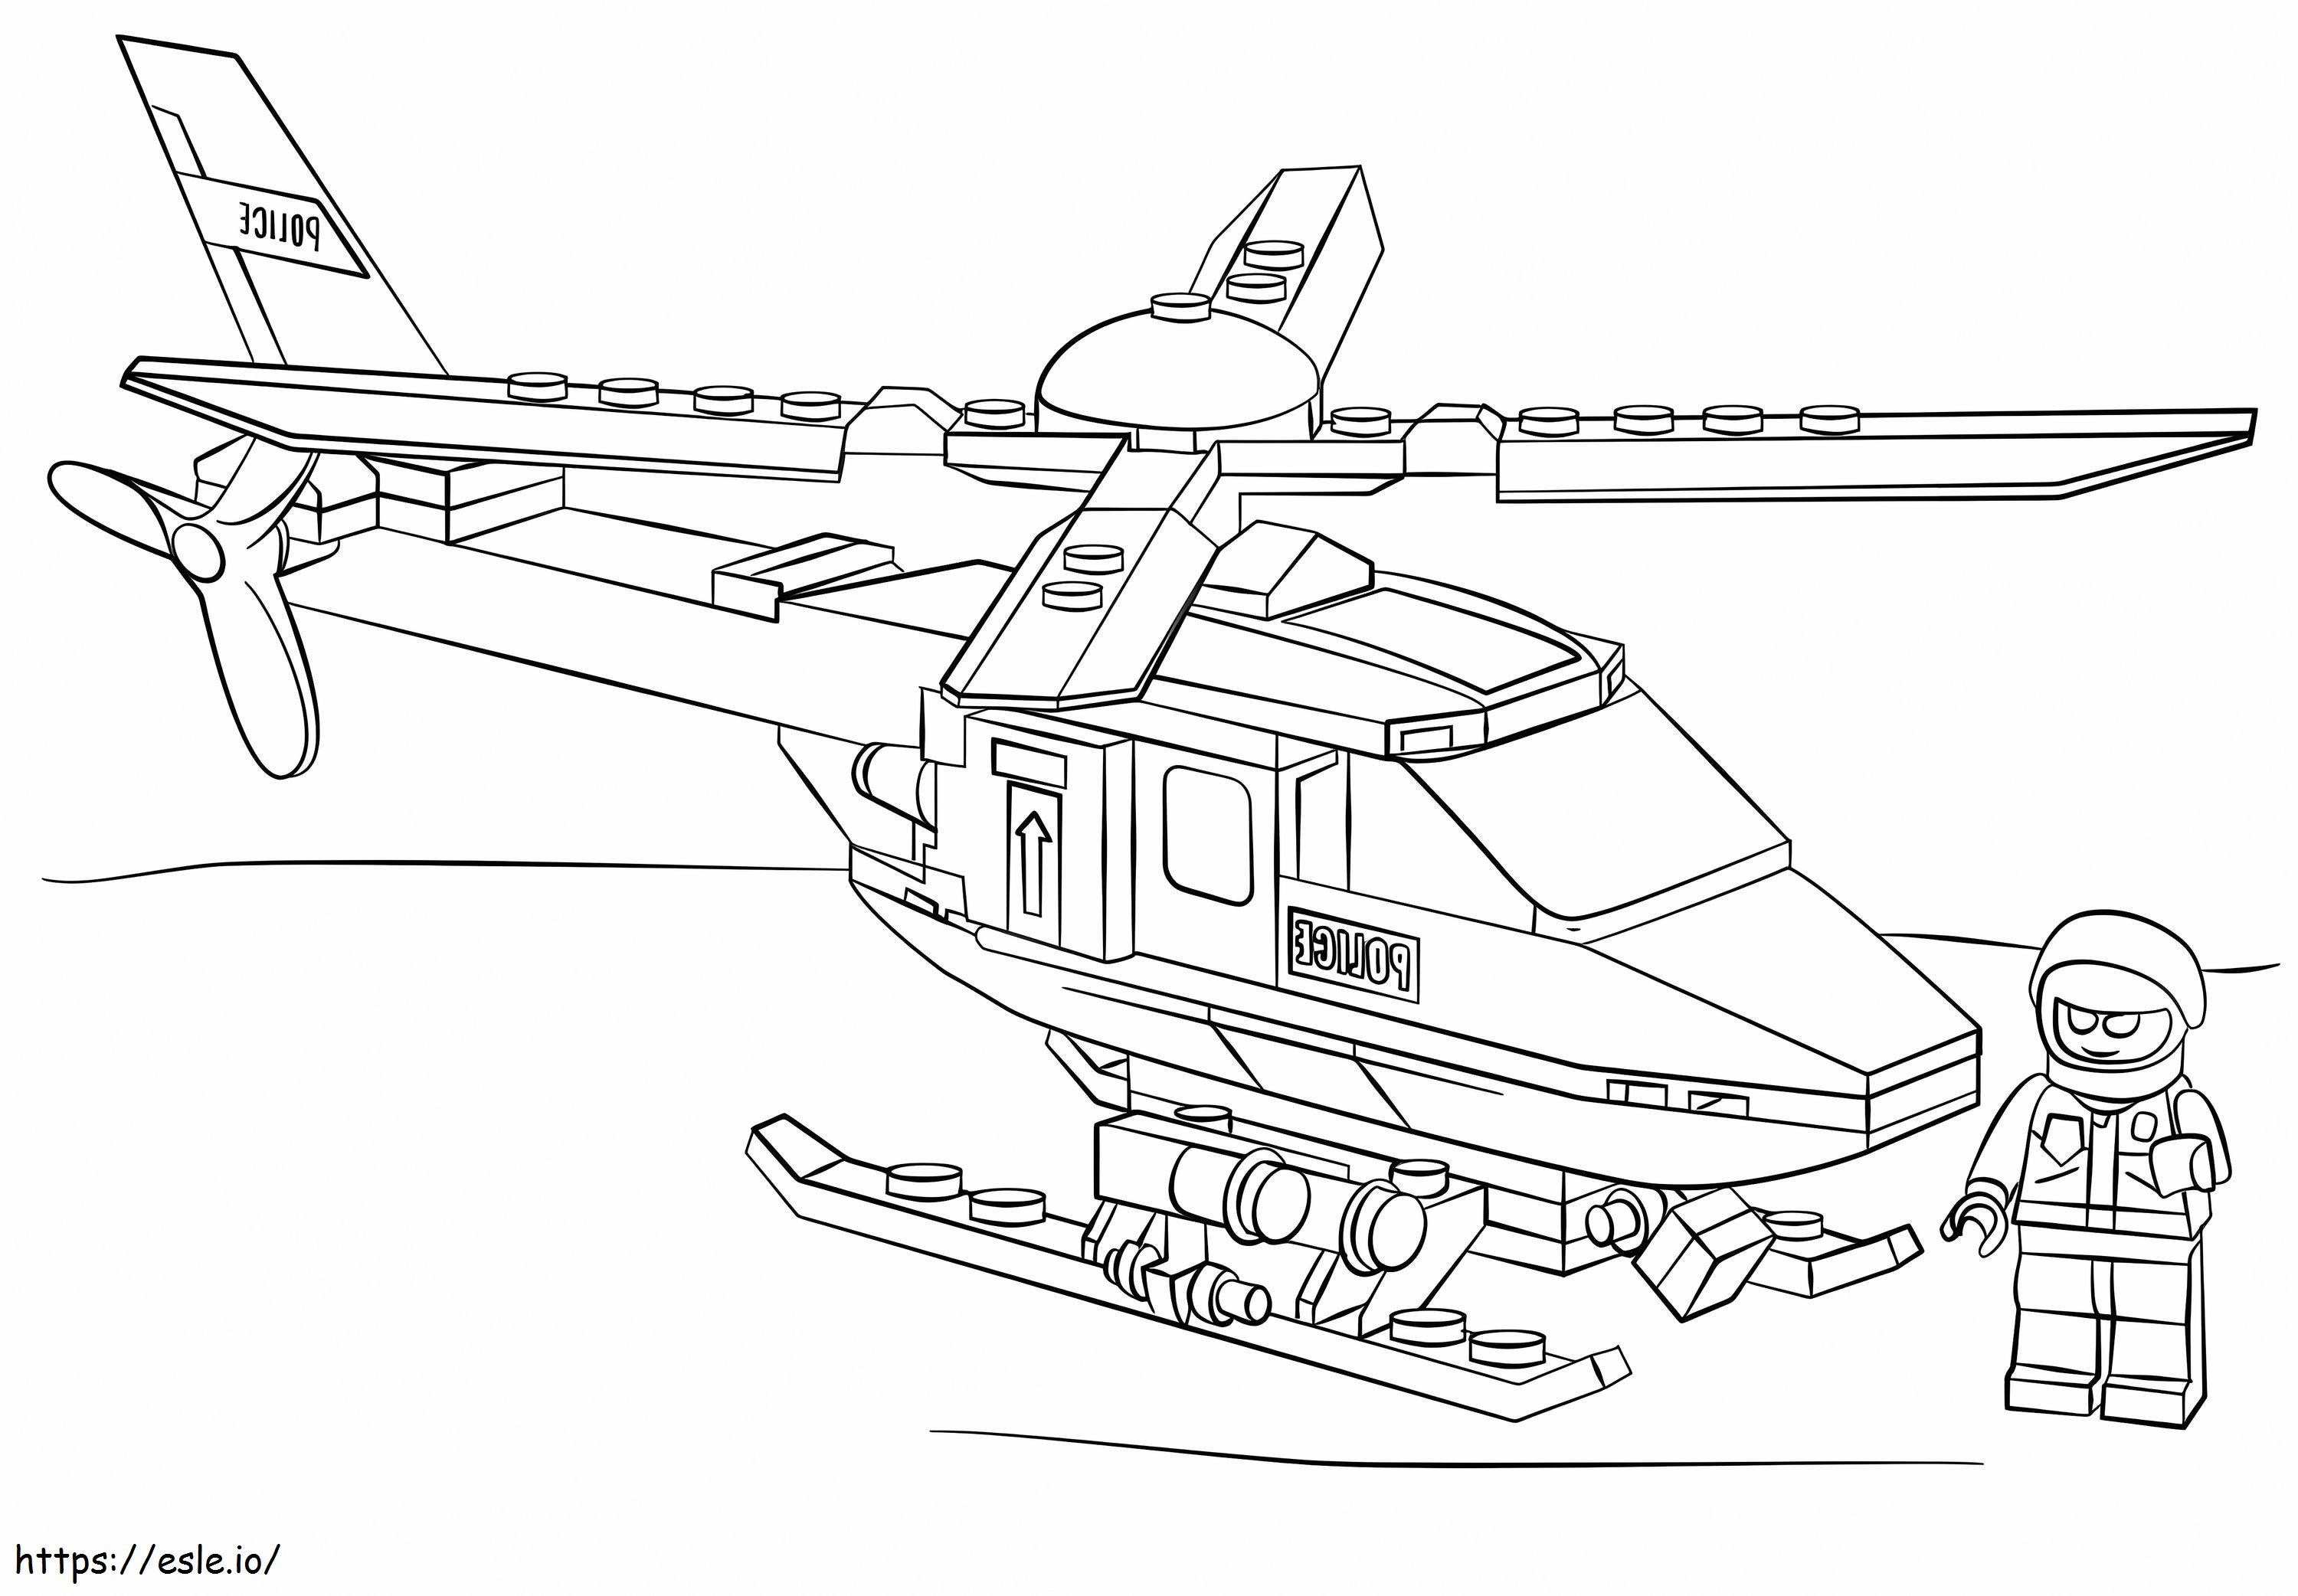 Helicoptero Lego coloring page